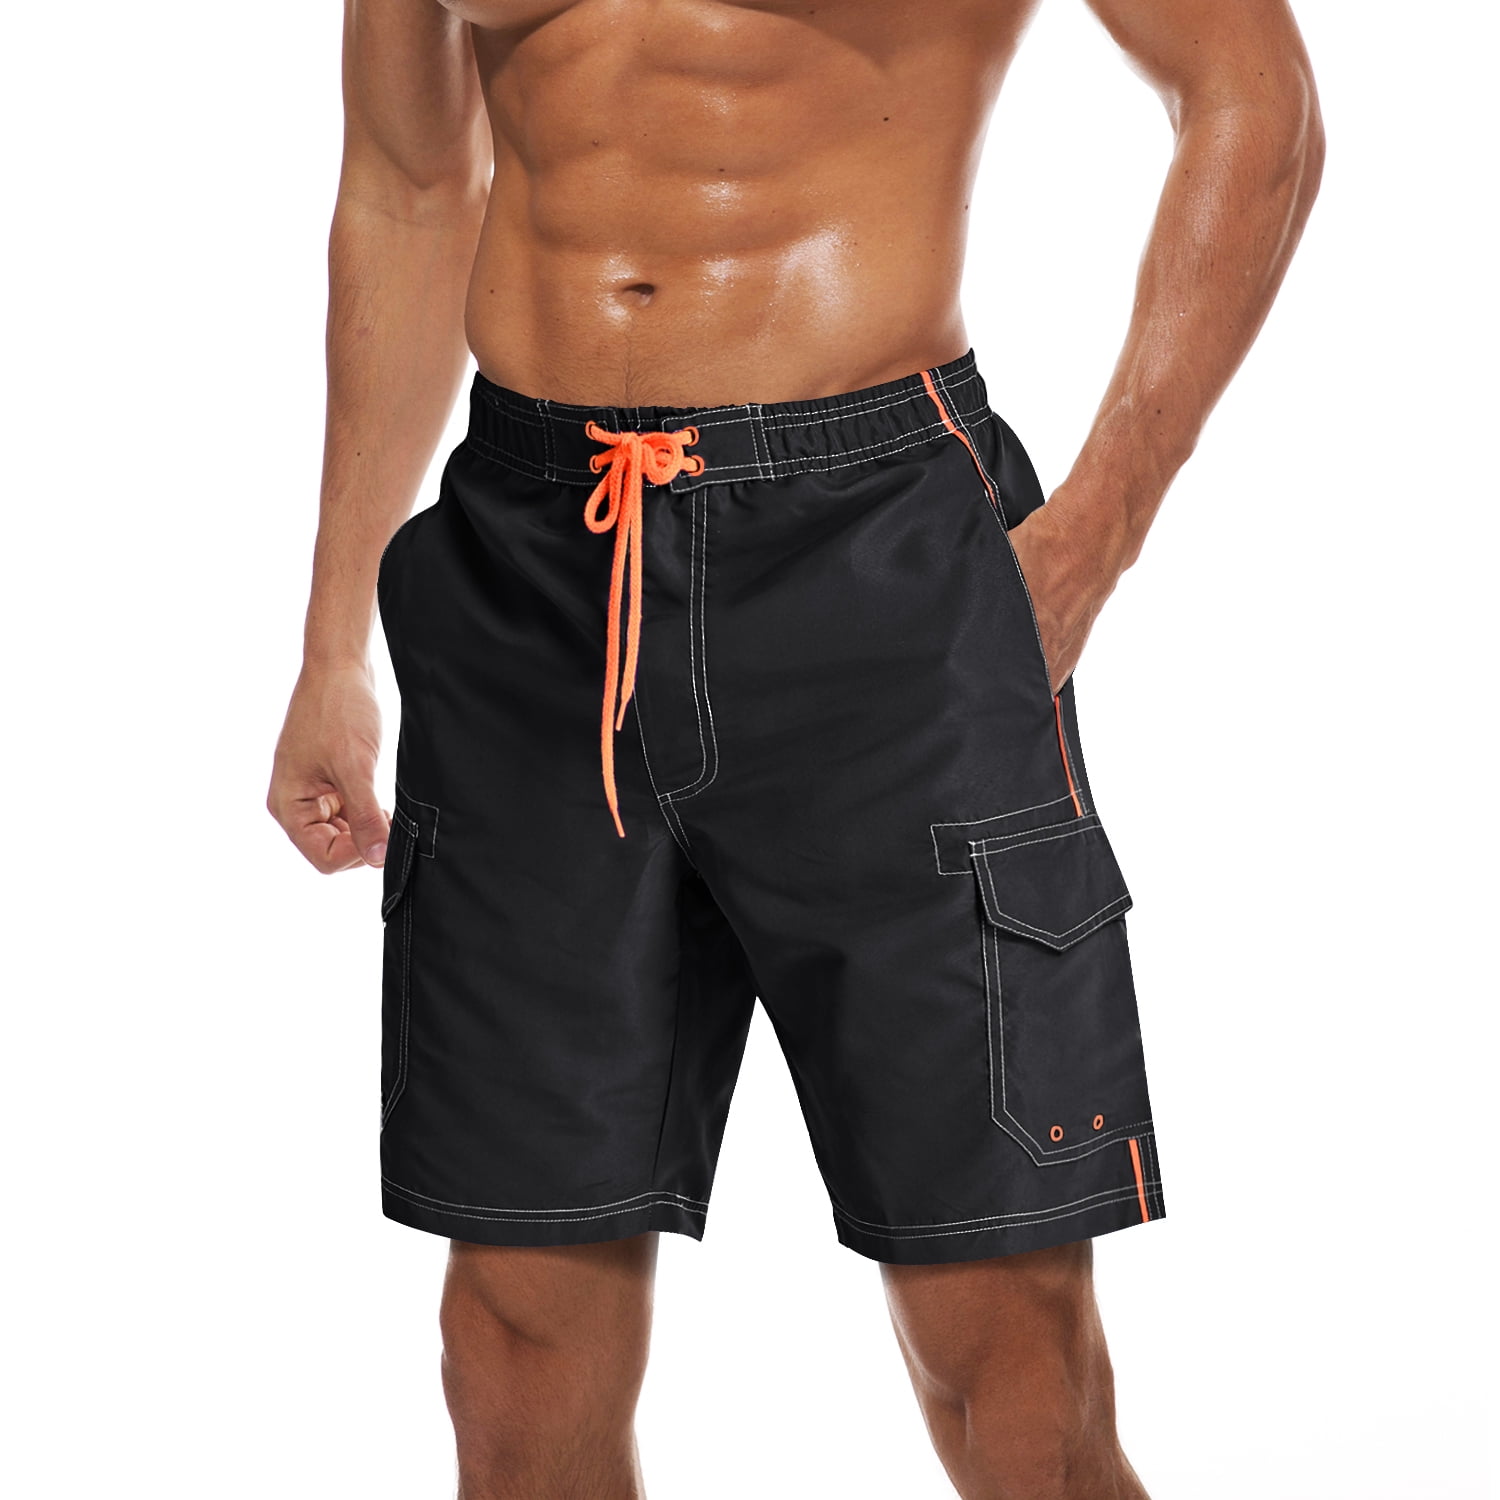 Pxiakgy Sports Net Beach Shorts Dry Quick With Inner UAE